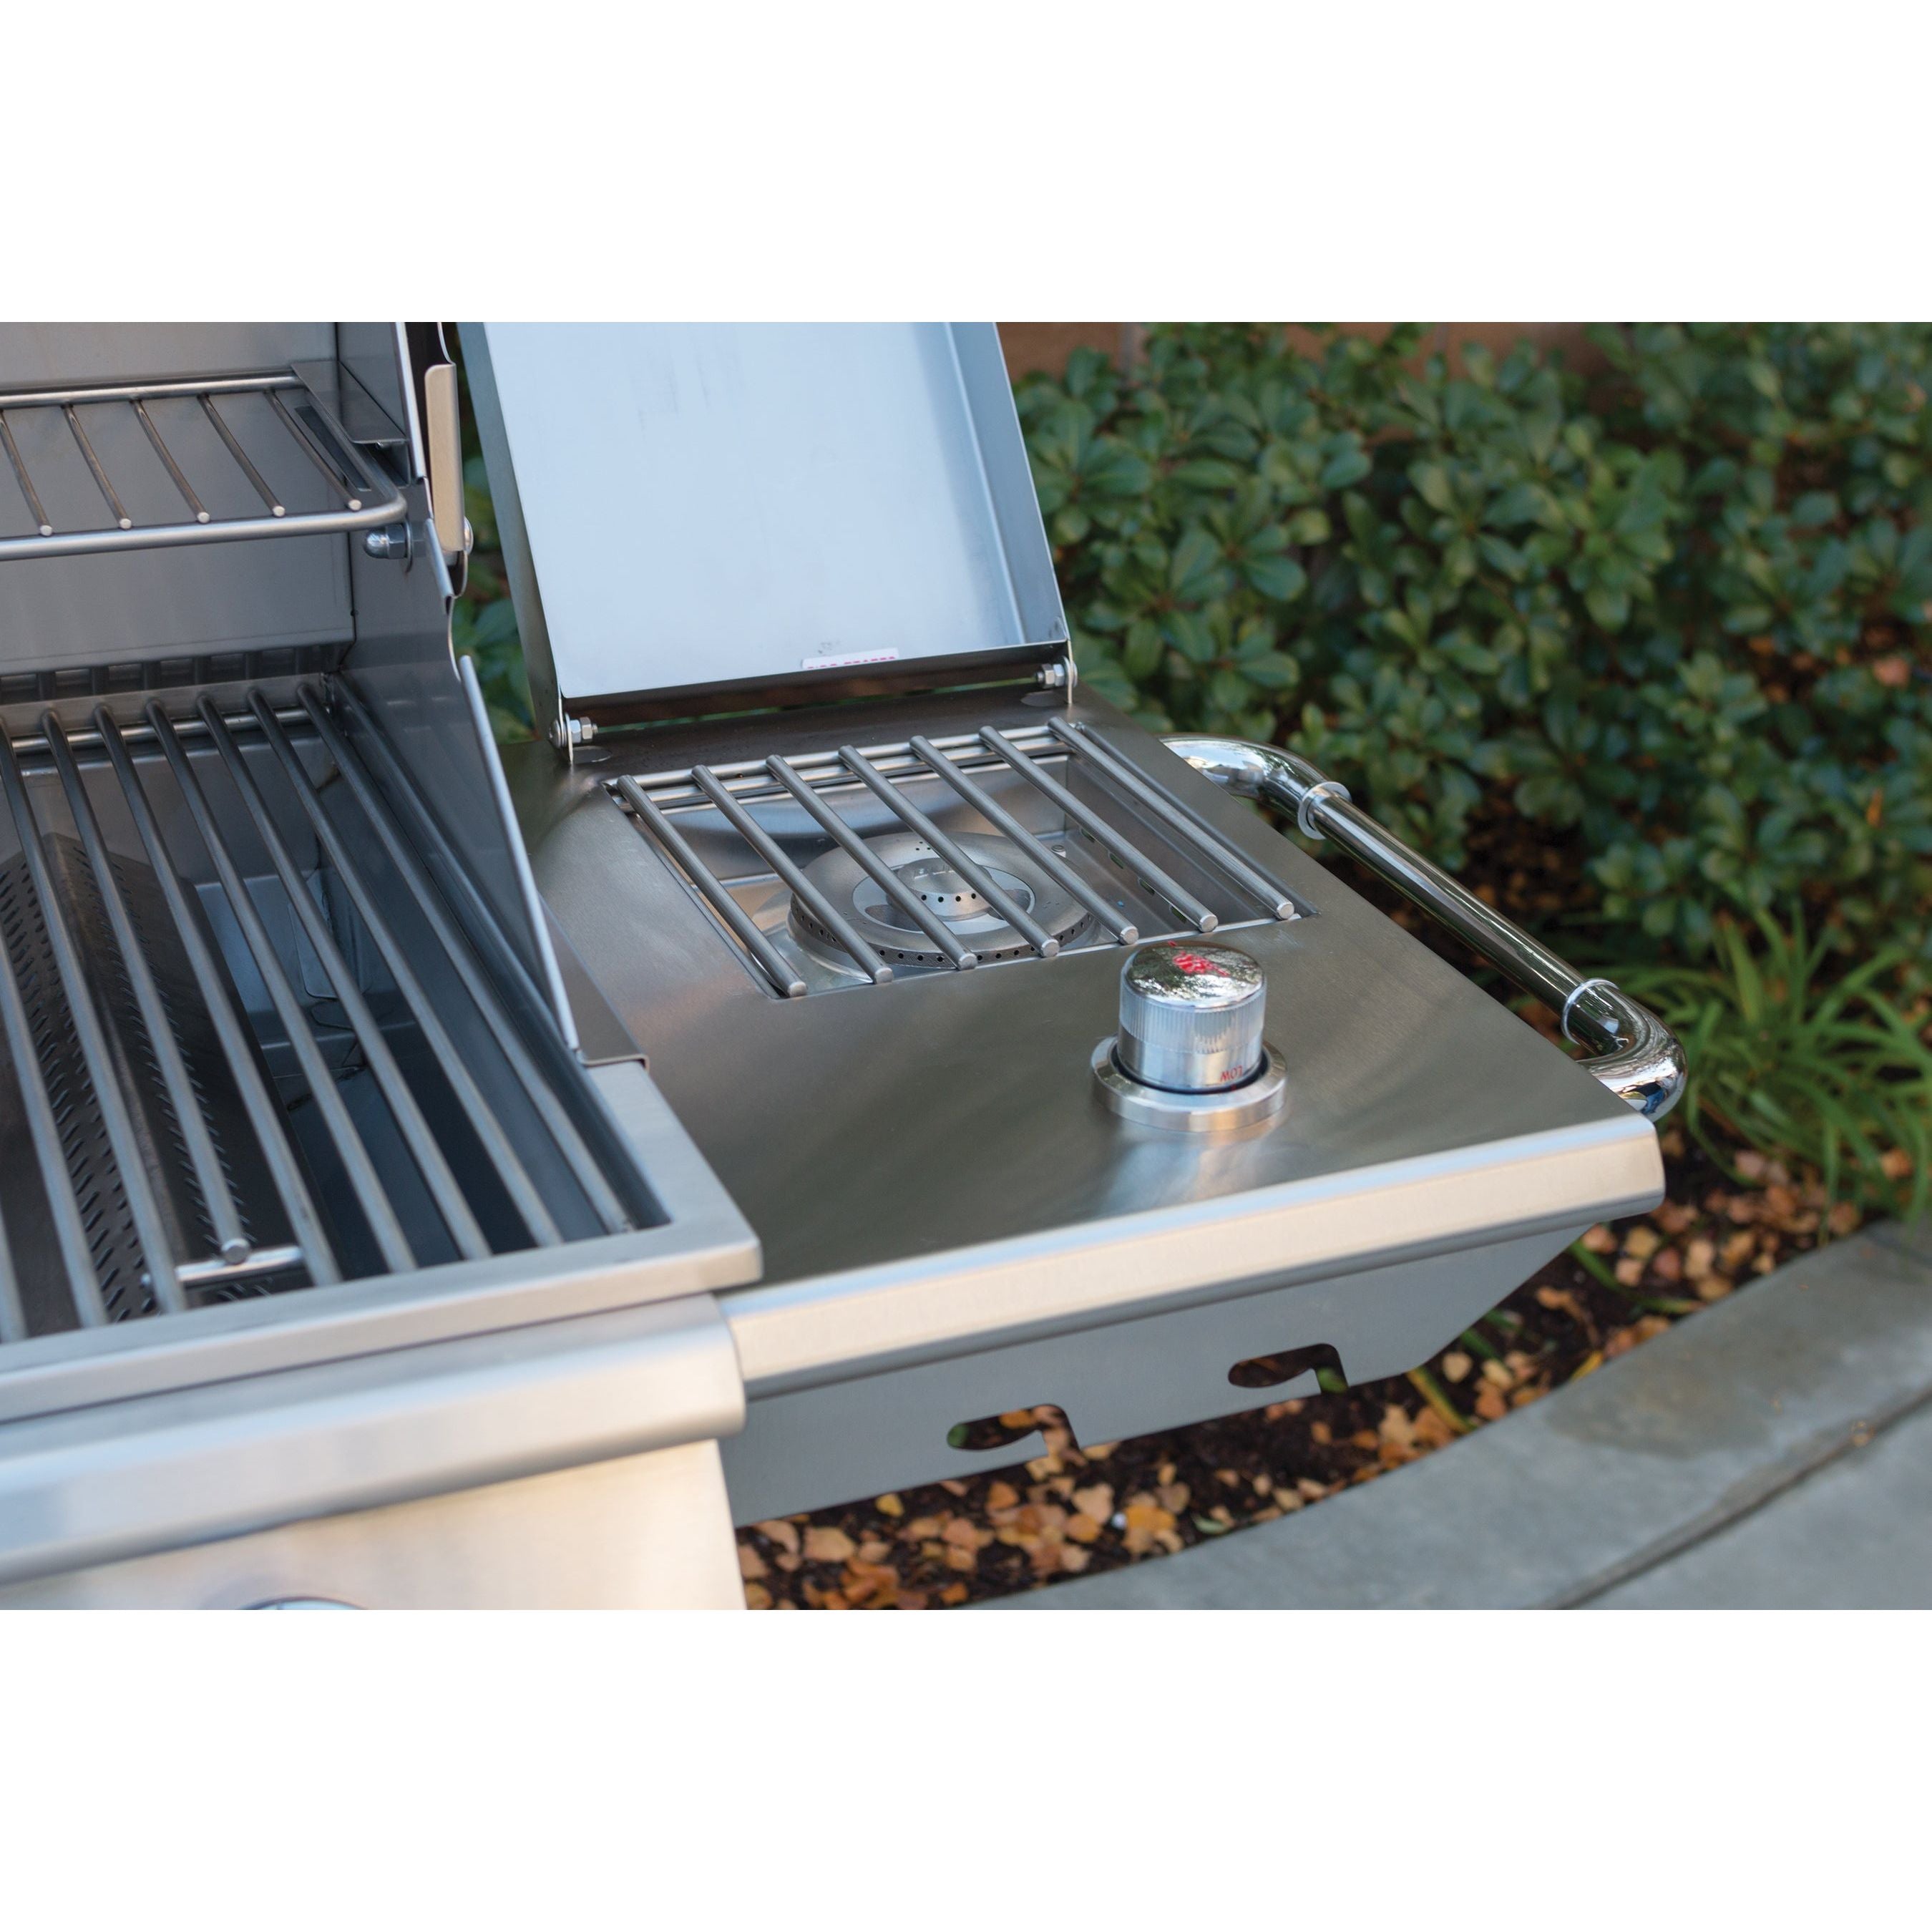 Bull Outdoor Grill Accessories Slide-In Removable Griddle - 97020